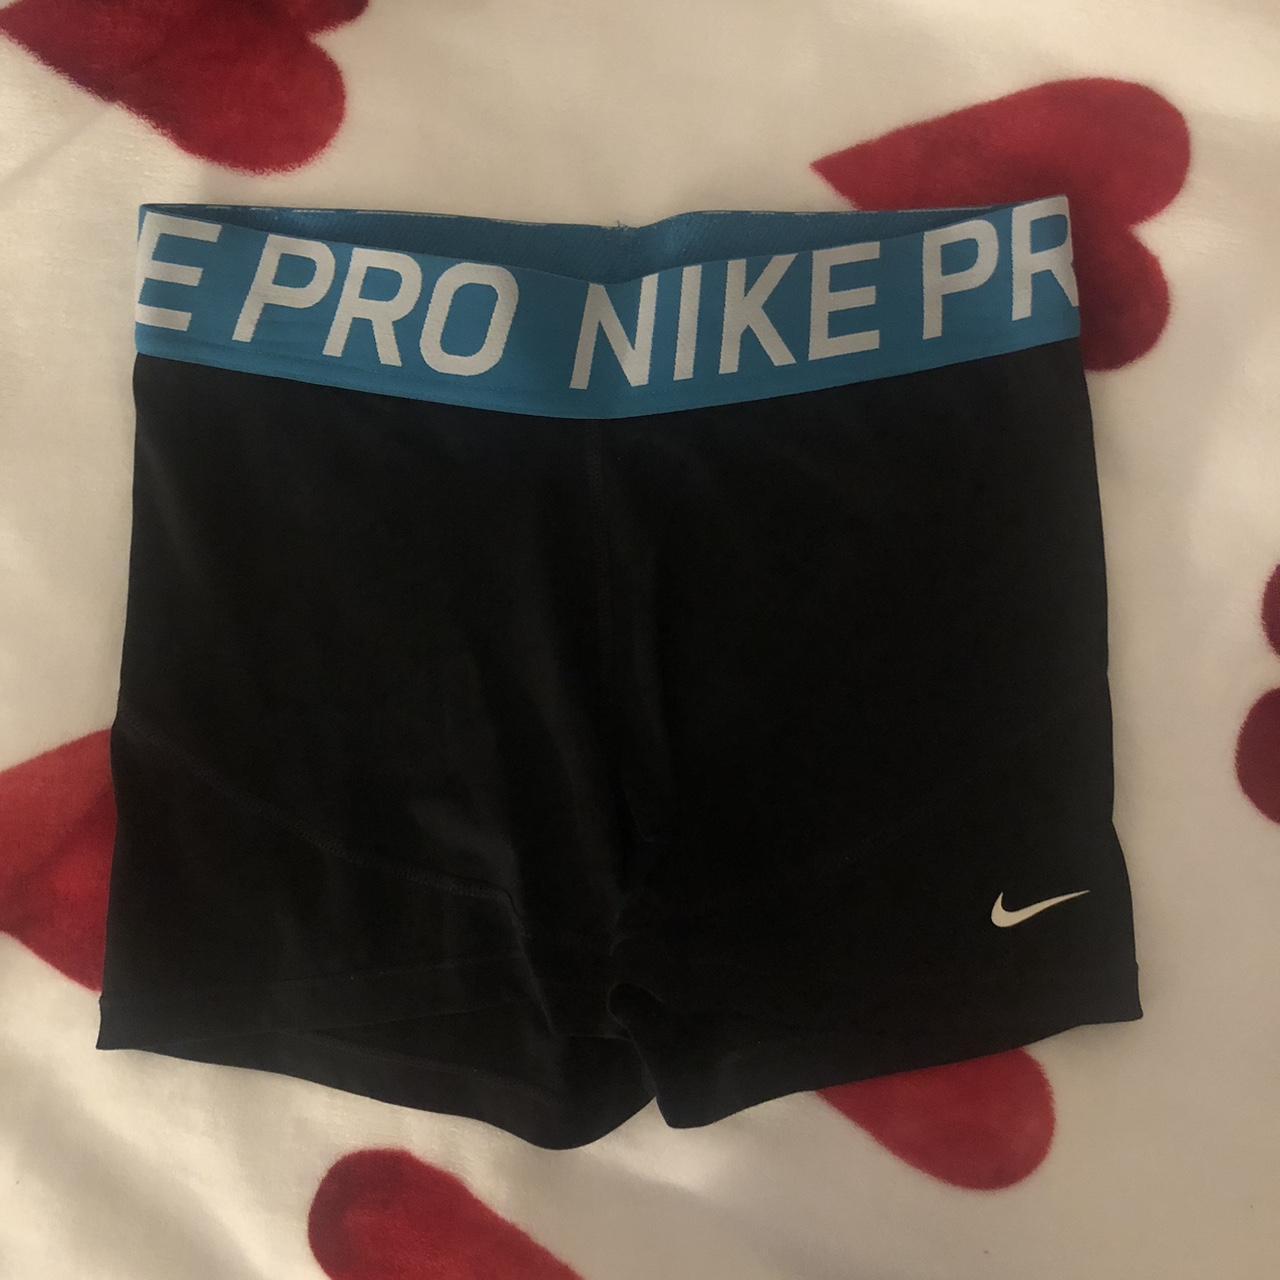 Nike pro spandex - gently used - love them but they... - Depop